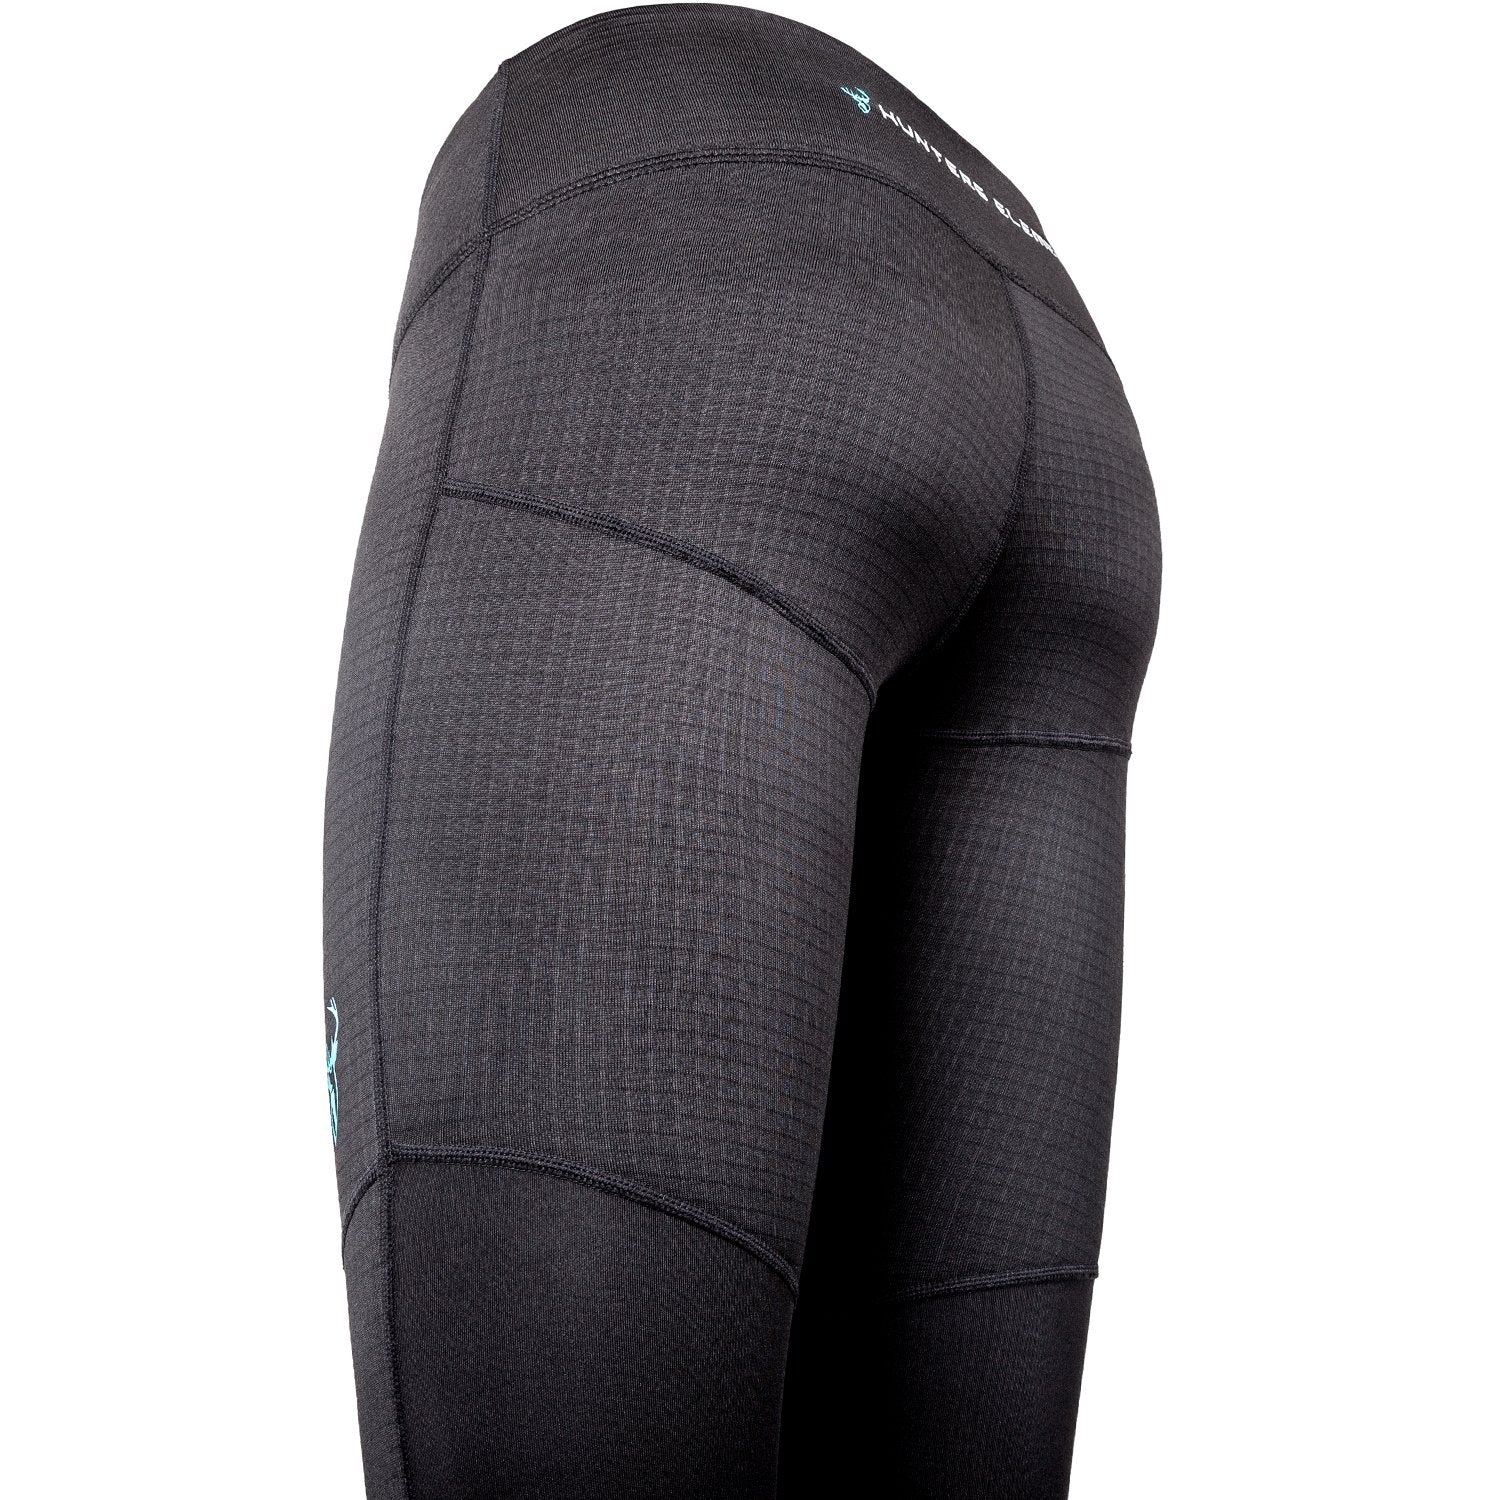 Hunters Element Womens Core+ Leggings Black -  - Mansfield Hunting & Fishing - Products to prepare for Corona Virus